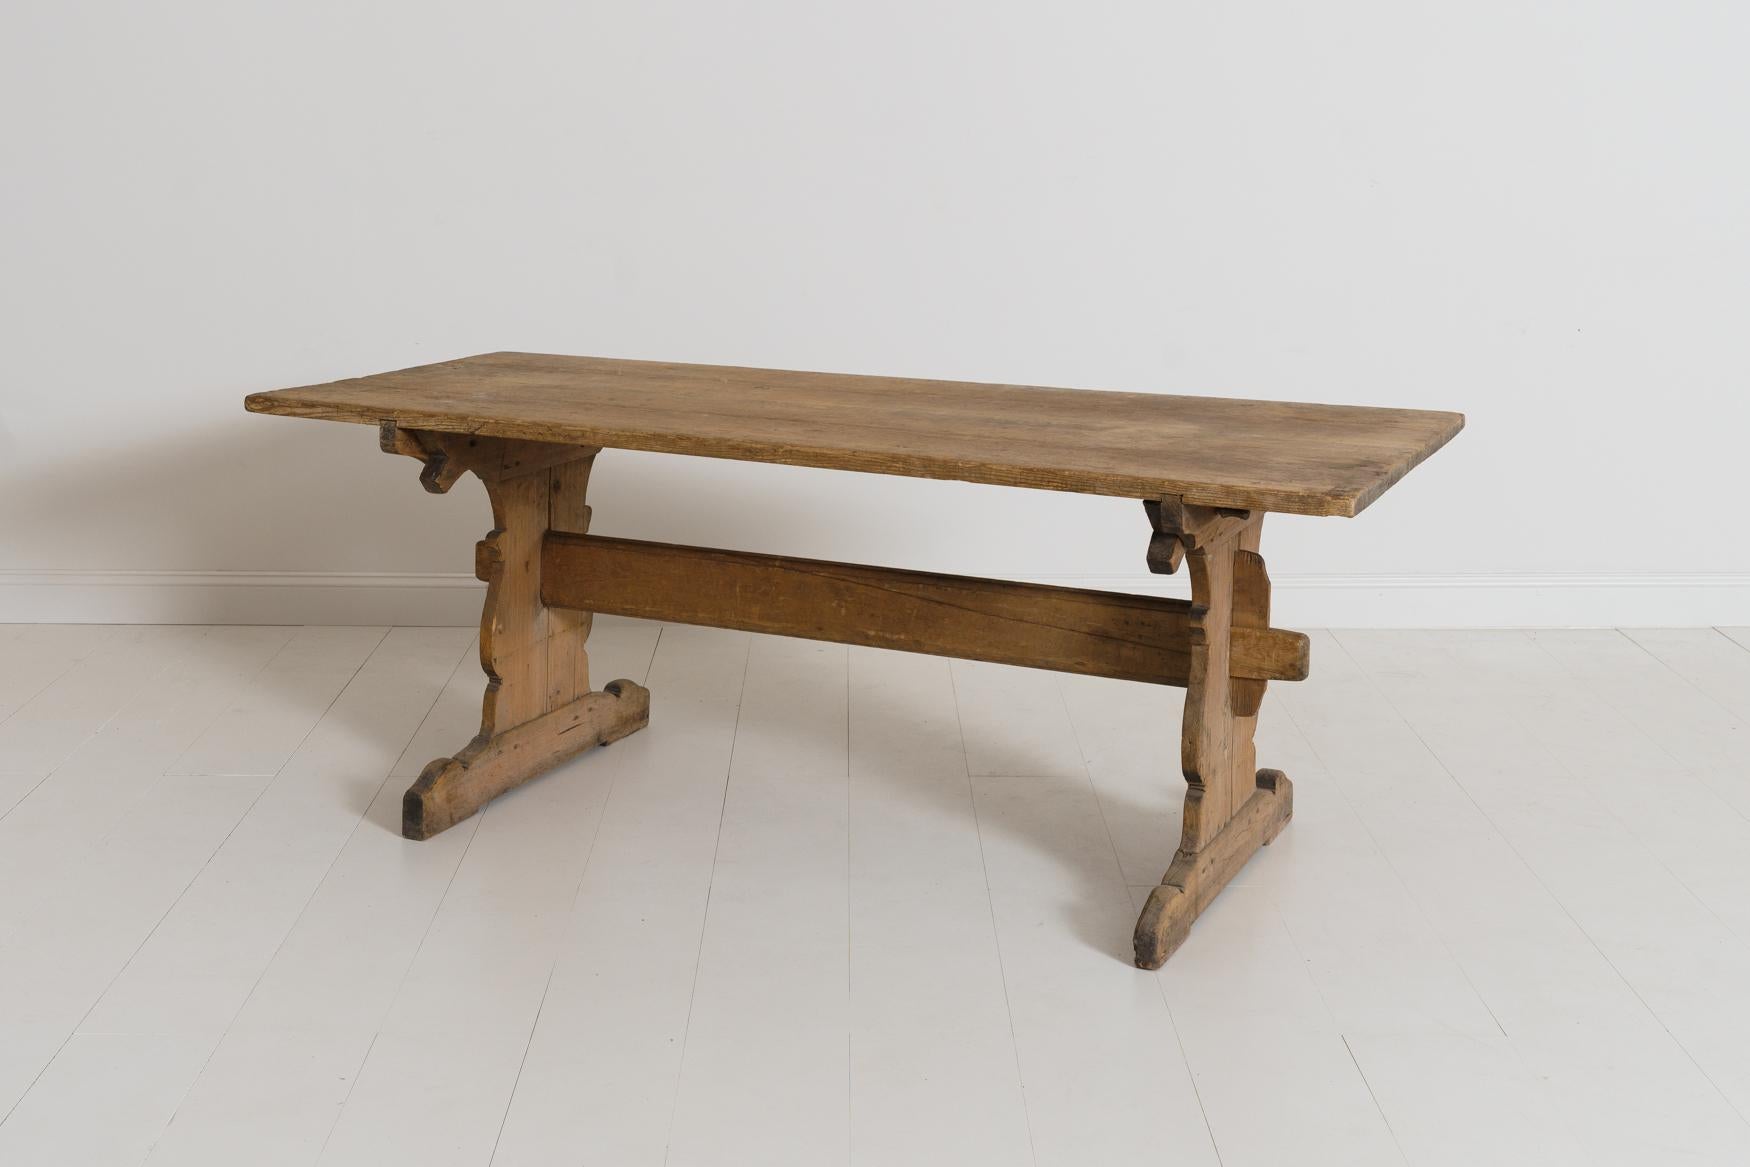 Hand-Carved 18th Century Swedish Gustavian Period Trestle Table